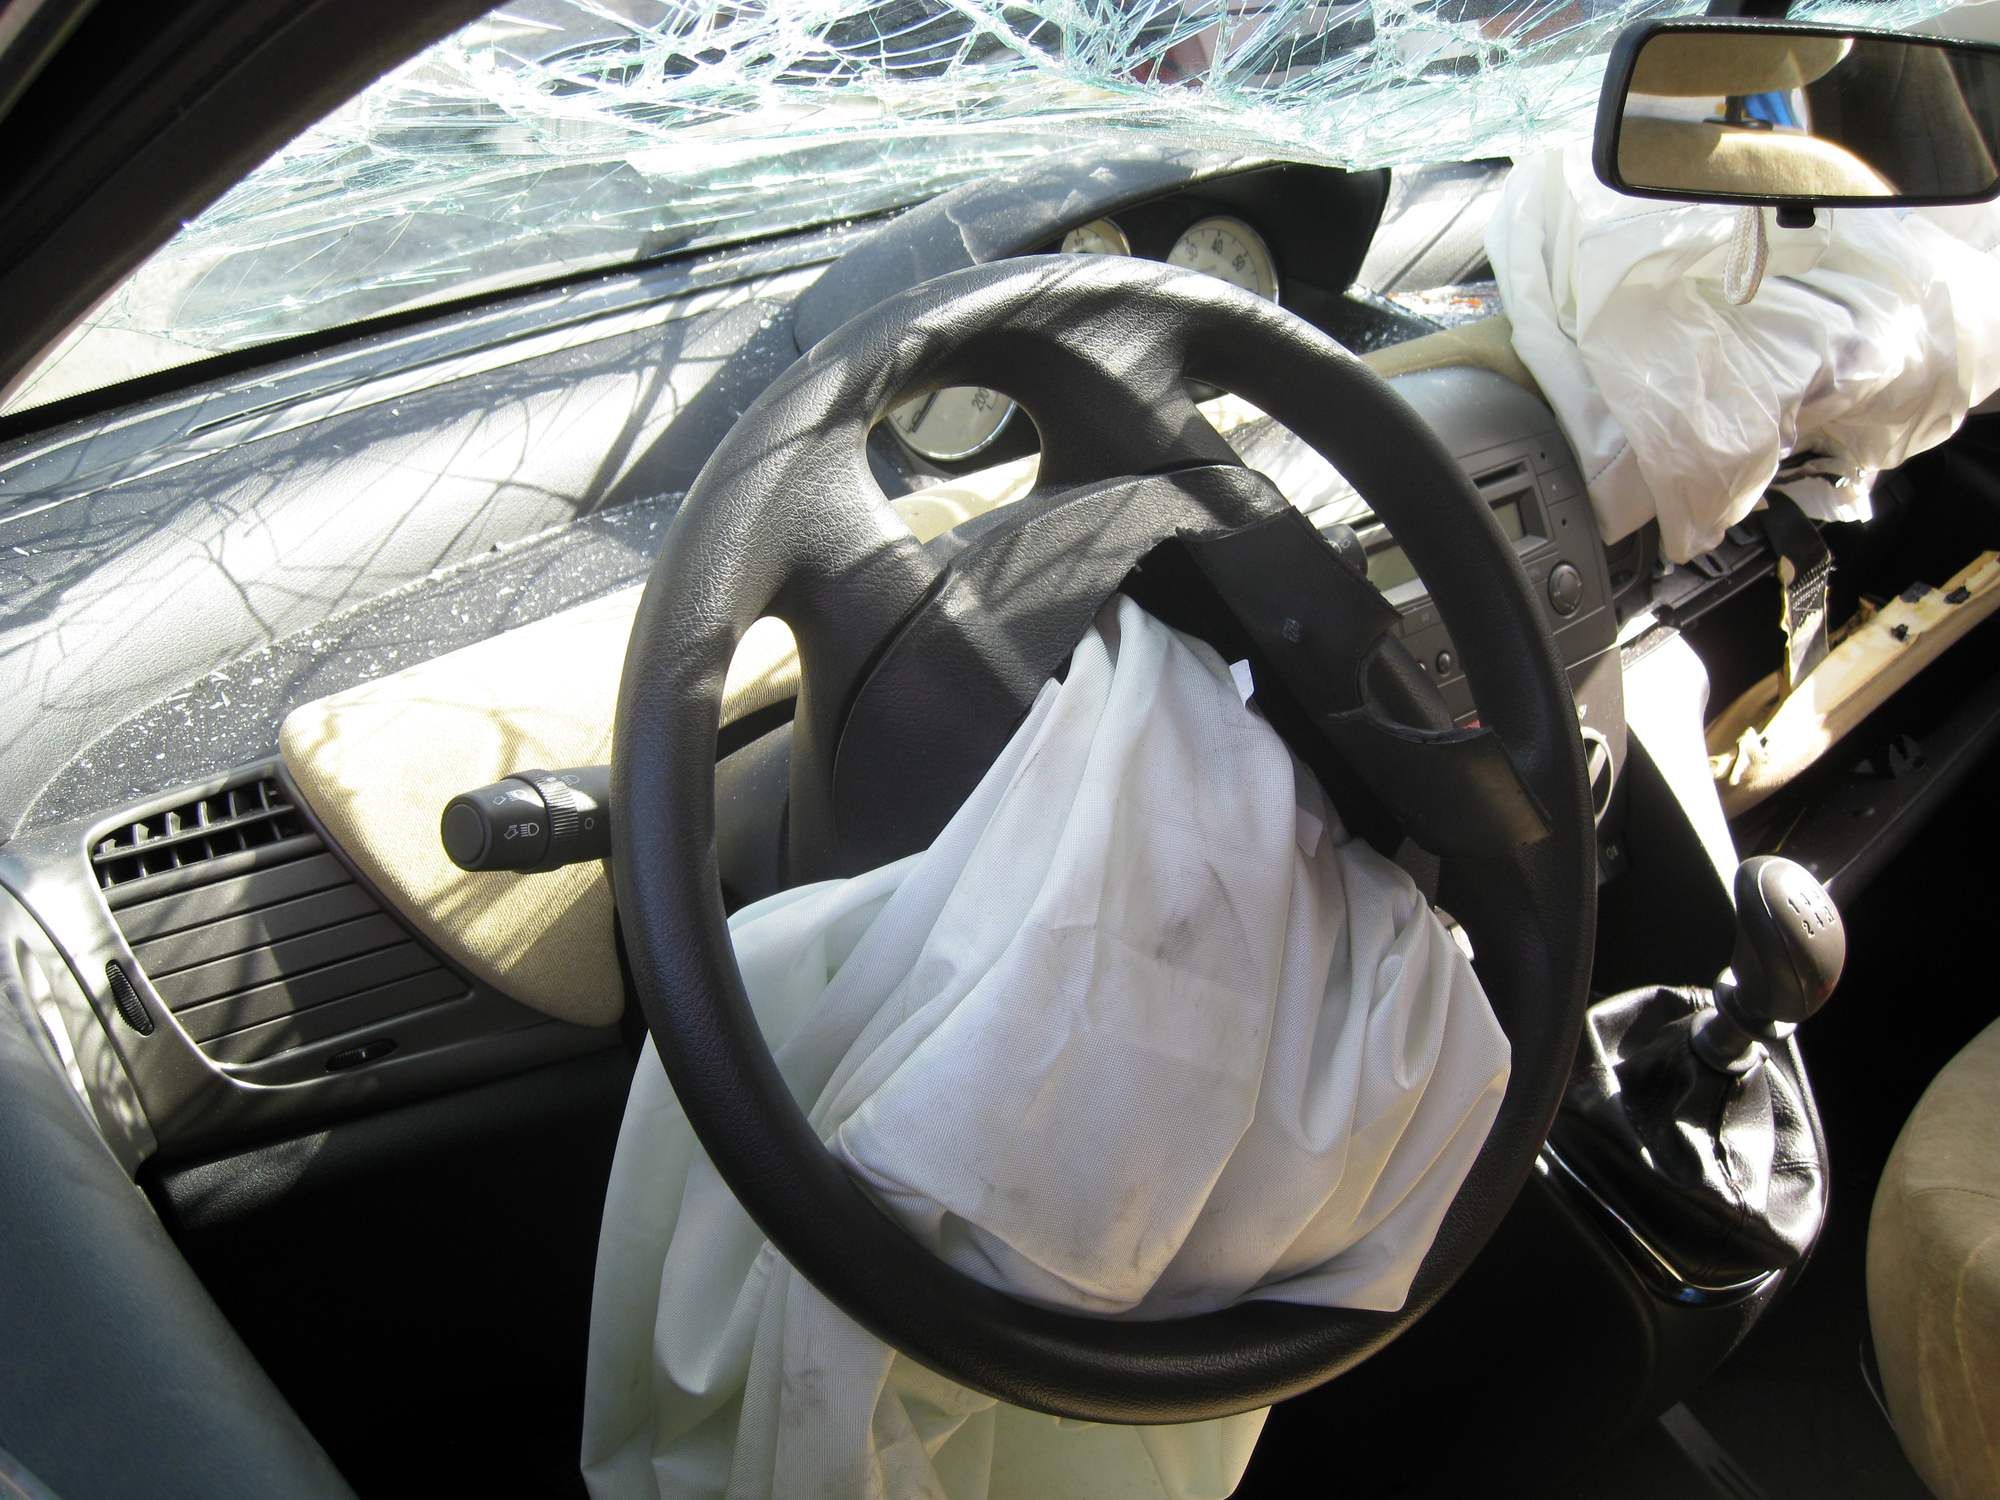 Takata Airbag Implicated in 19th Death in United States